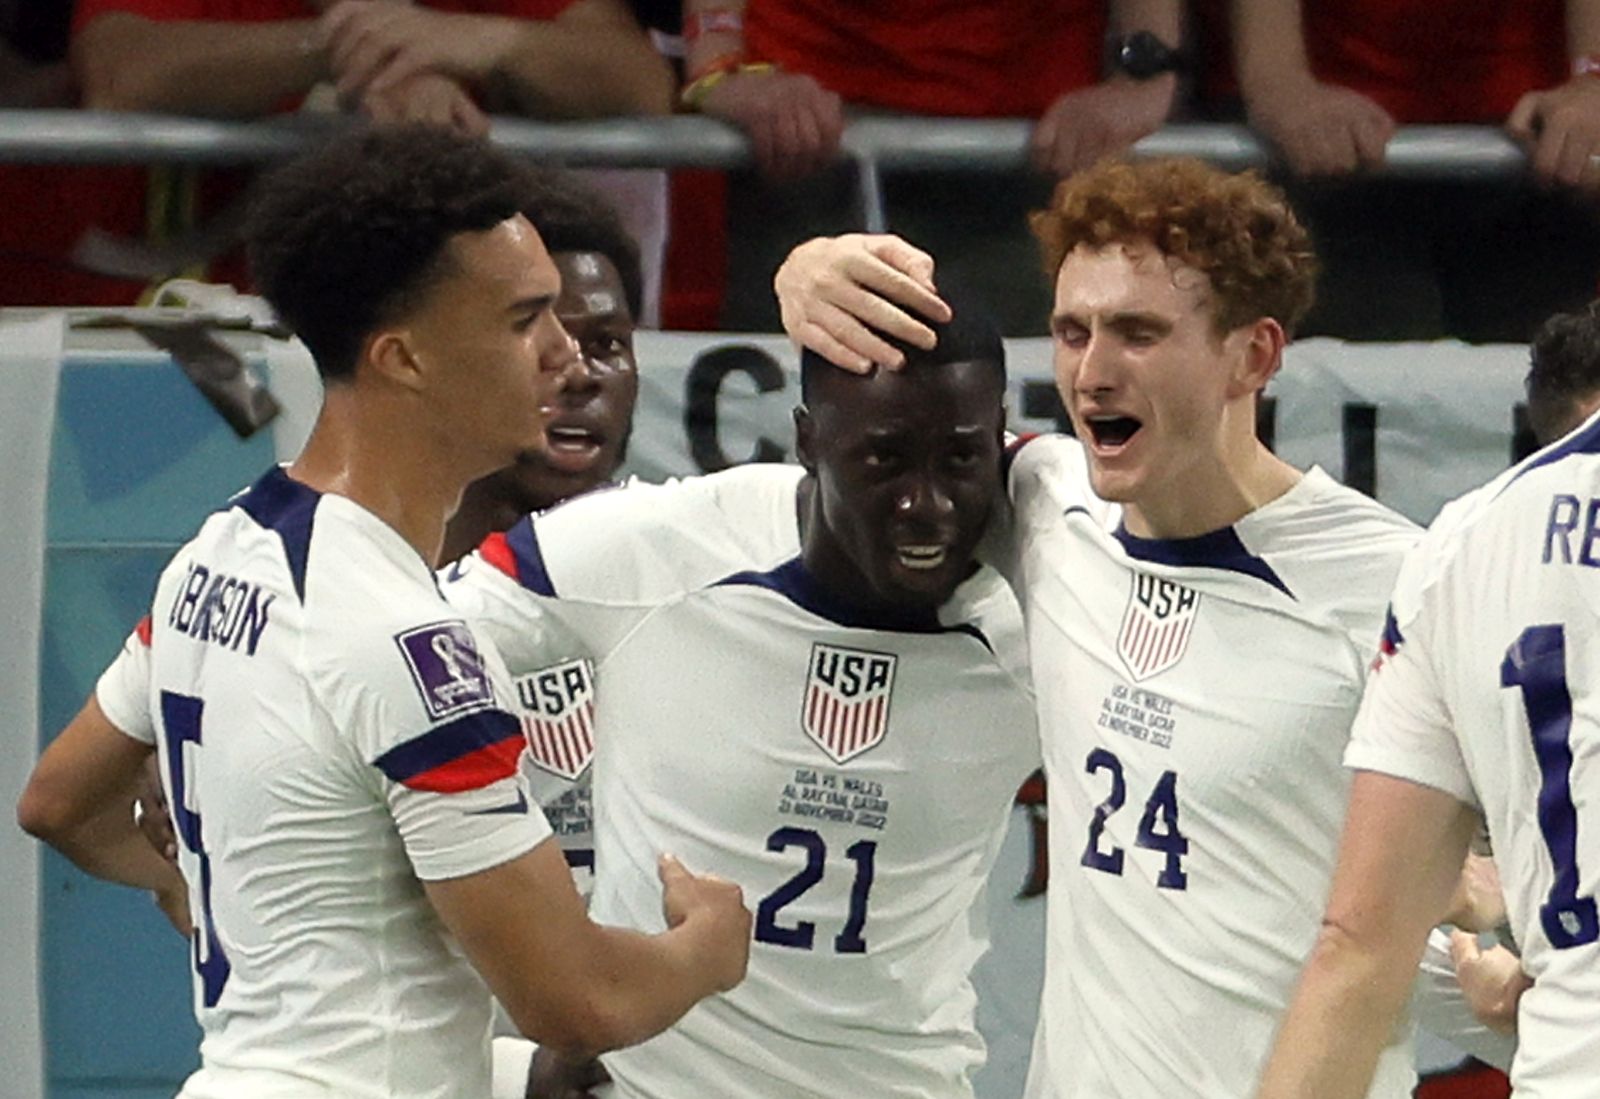 epa10318922 Timothy Weah (3L) of the USA celebrates with teammates after scoring the opening goal during the FIFA World Cup 2022 group B soccer match between the USA and Wales at Ahmad bin Ali Stadium in Doha, Qatar, 21 November 2022.  EPA/Ronald Wittek